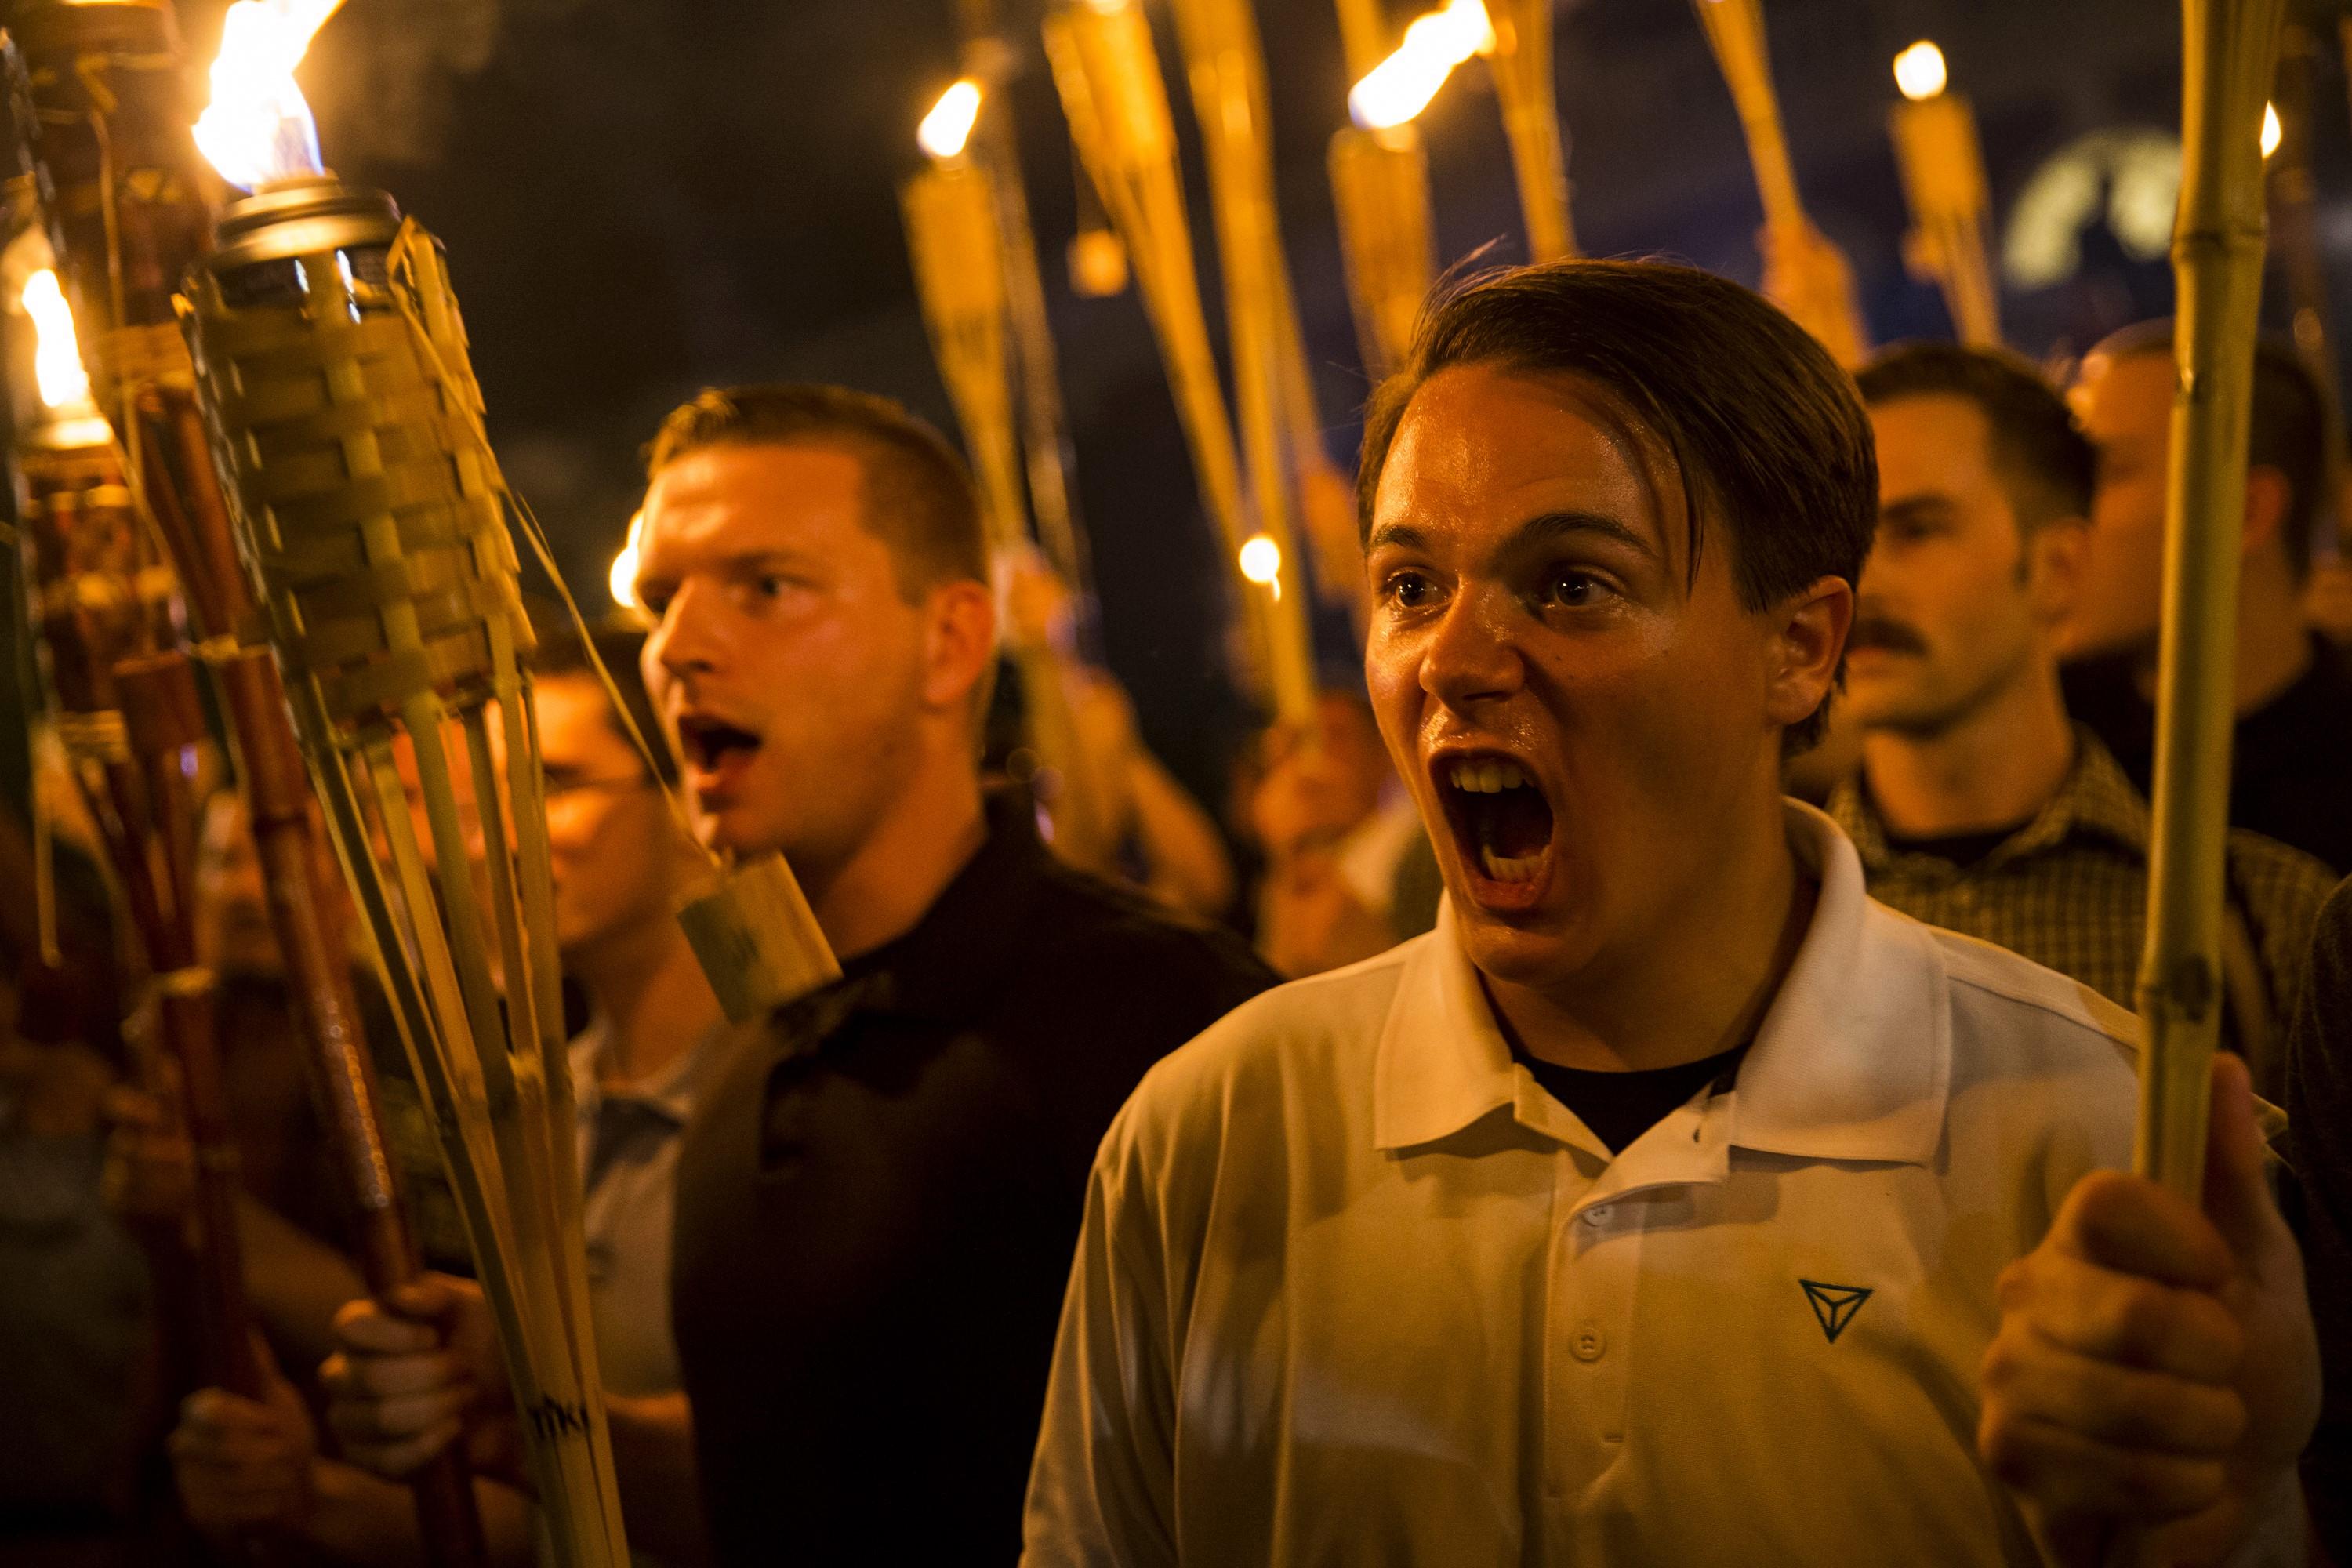 Charlottesville torch photo: White nationalist Peter Cytanovic wants people to know he is not "an evil Nazi" — Quartz